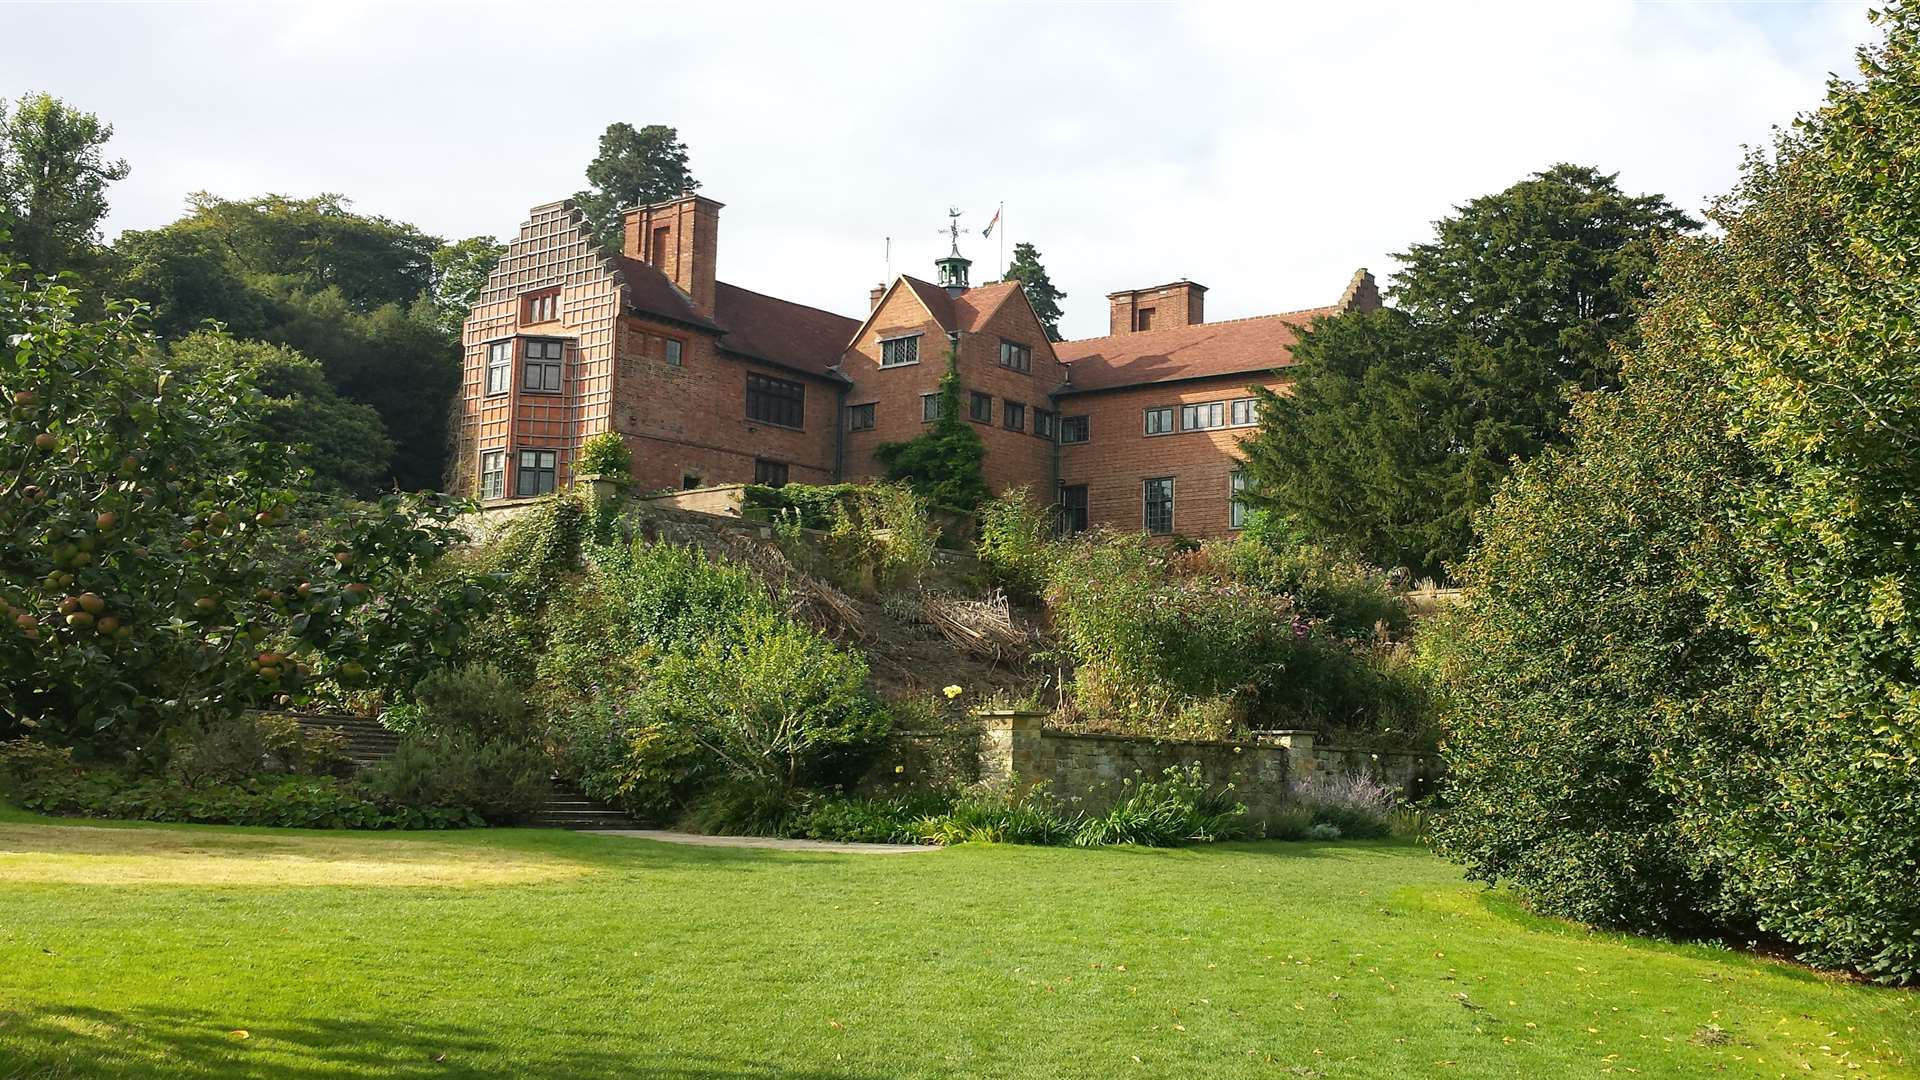 Chartwell is the former home of Sir Winston Churchill.